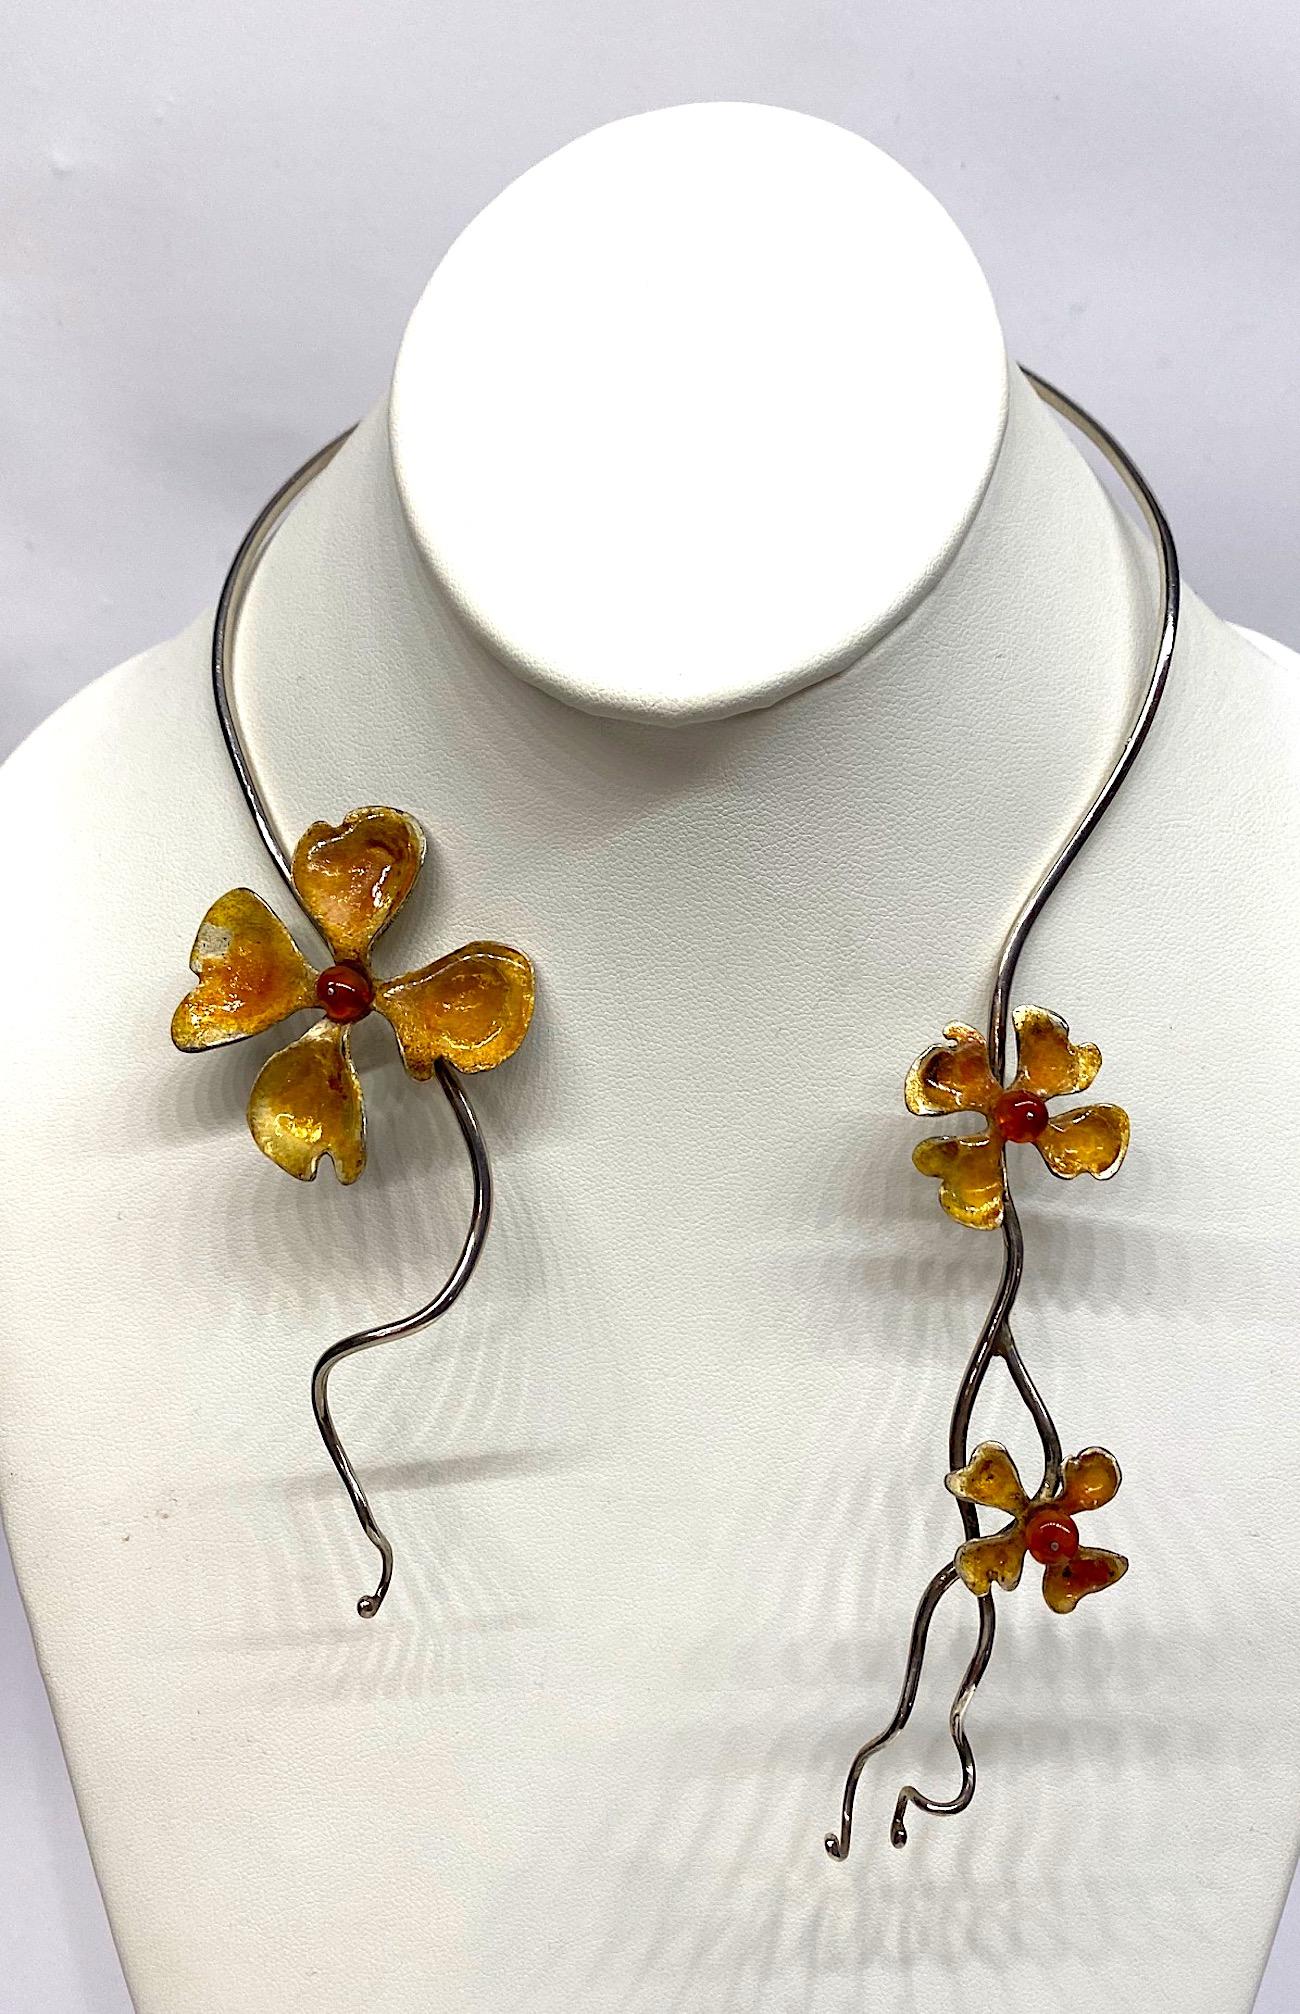 An artist made rigid necklace mounted with three enamel flowers circa 1970/80. 3 mm sterling silver wire is curved to fit around the neck. Each end is curled and gracefully tapers to a little over 1 mm finishing with a small ball. There are three